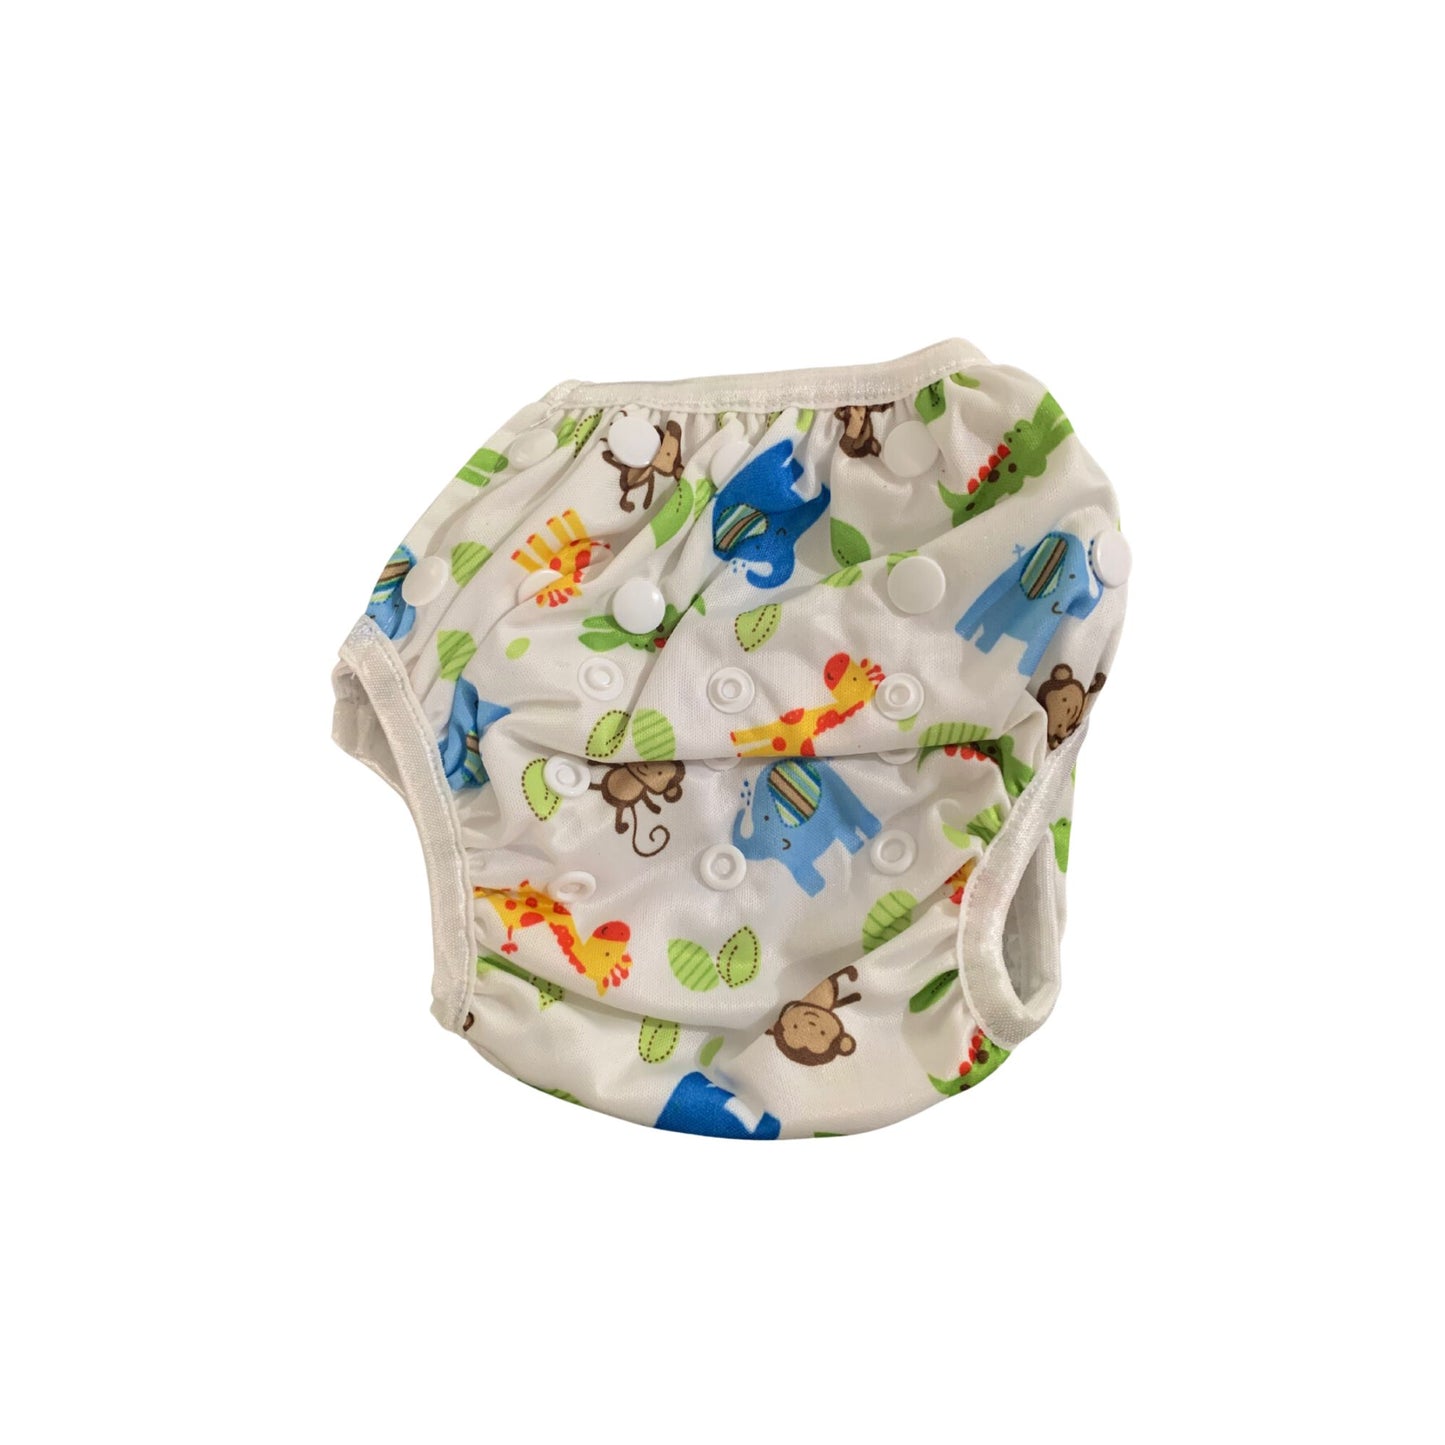 Next9 Swimming Diaper For Babies and Toddlers weighing 7 to 28 lbs